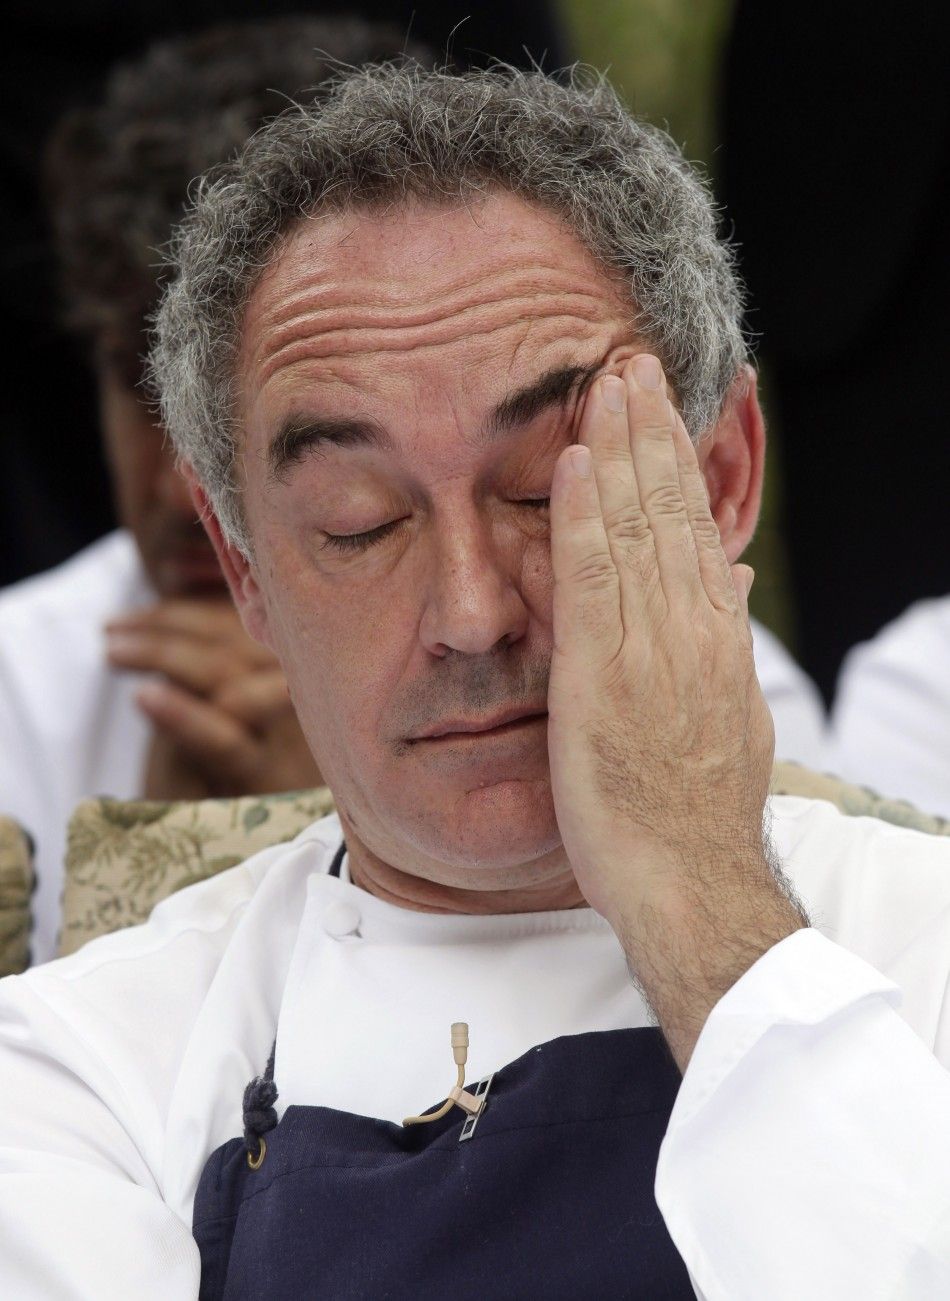 Ferran Adria, chef and co-owner of El Bulli restaurant, is seen during a news conference outside the restaurant in Cala Montjoi, near Roses .